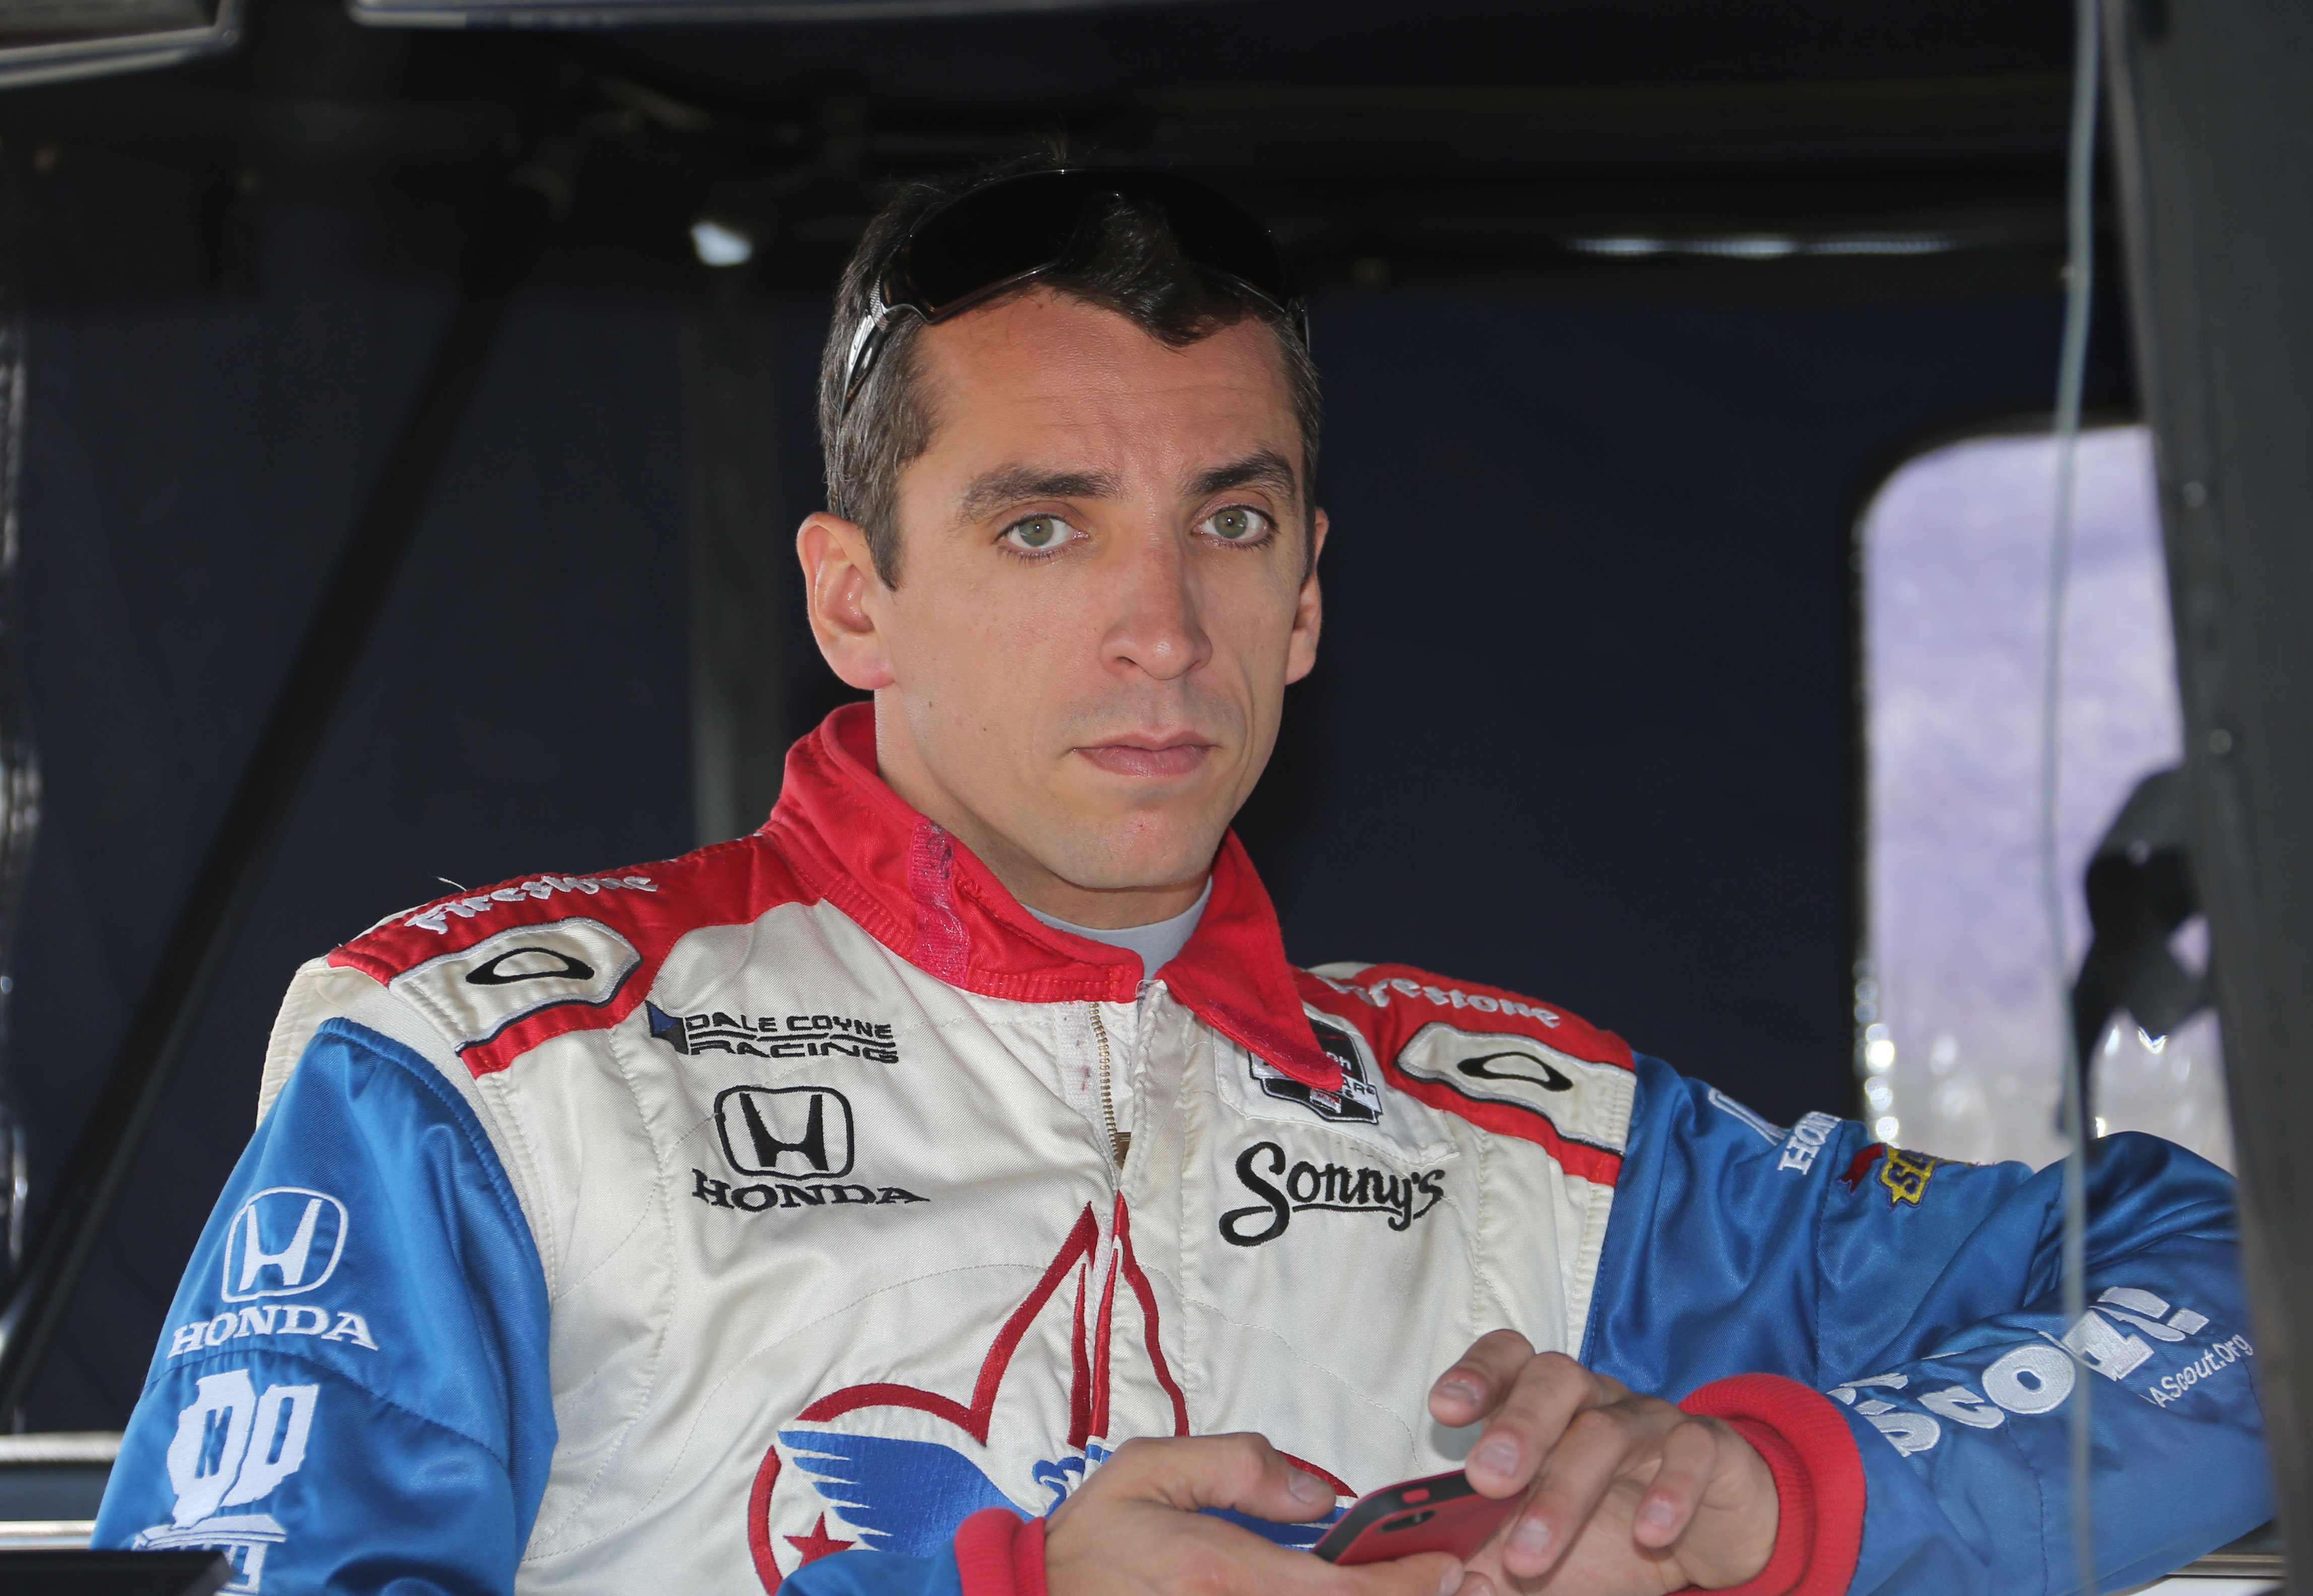 Justin Wilson, 37, died from his injuries after flying debris hit him following a crash at the Pocono circuit in the  IndyCar 500 series. Photos: AP